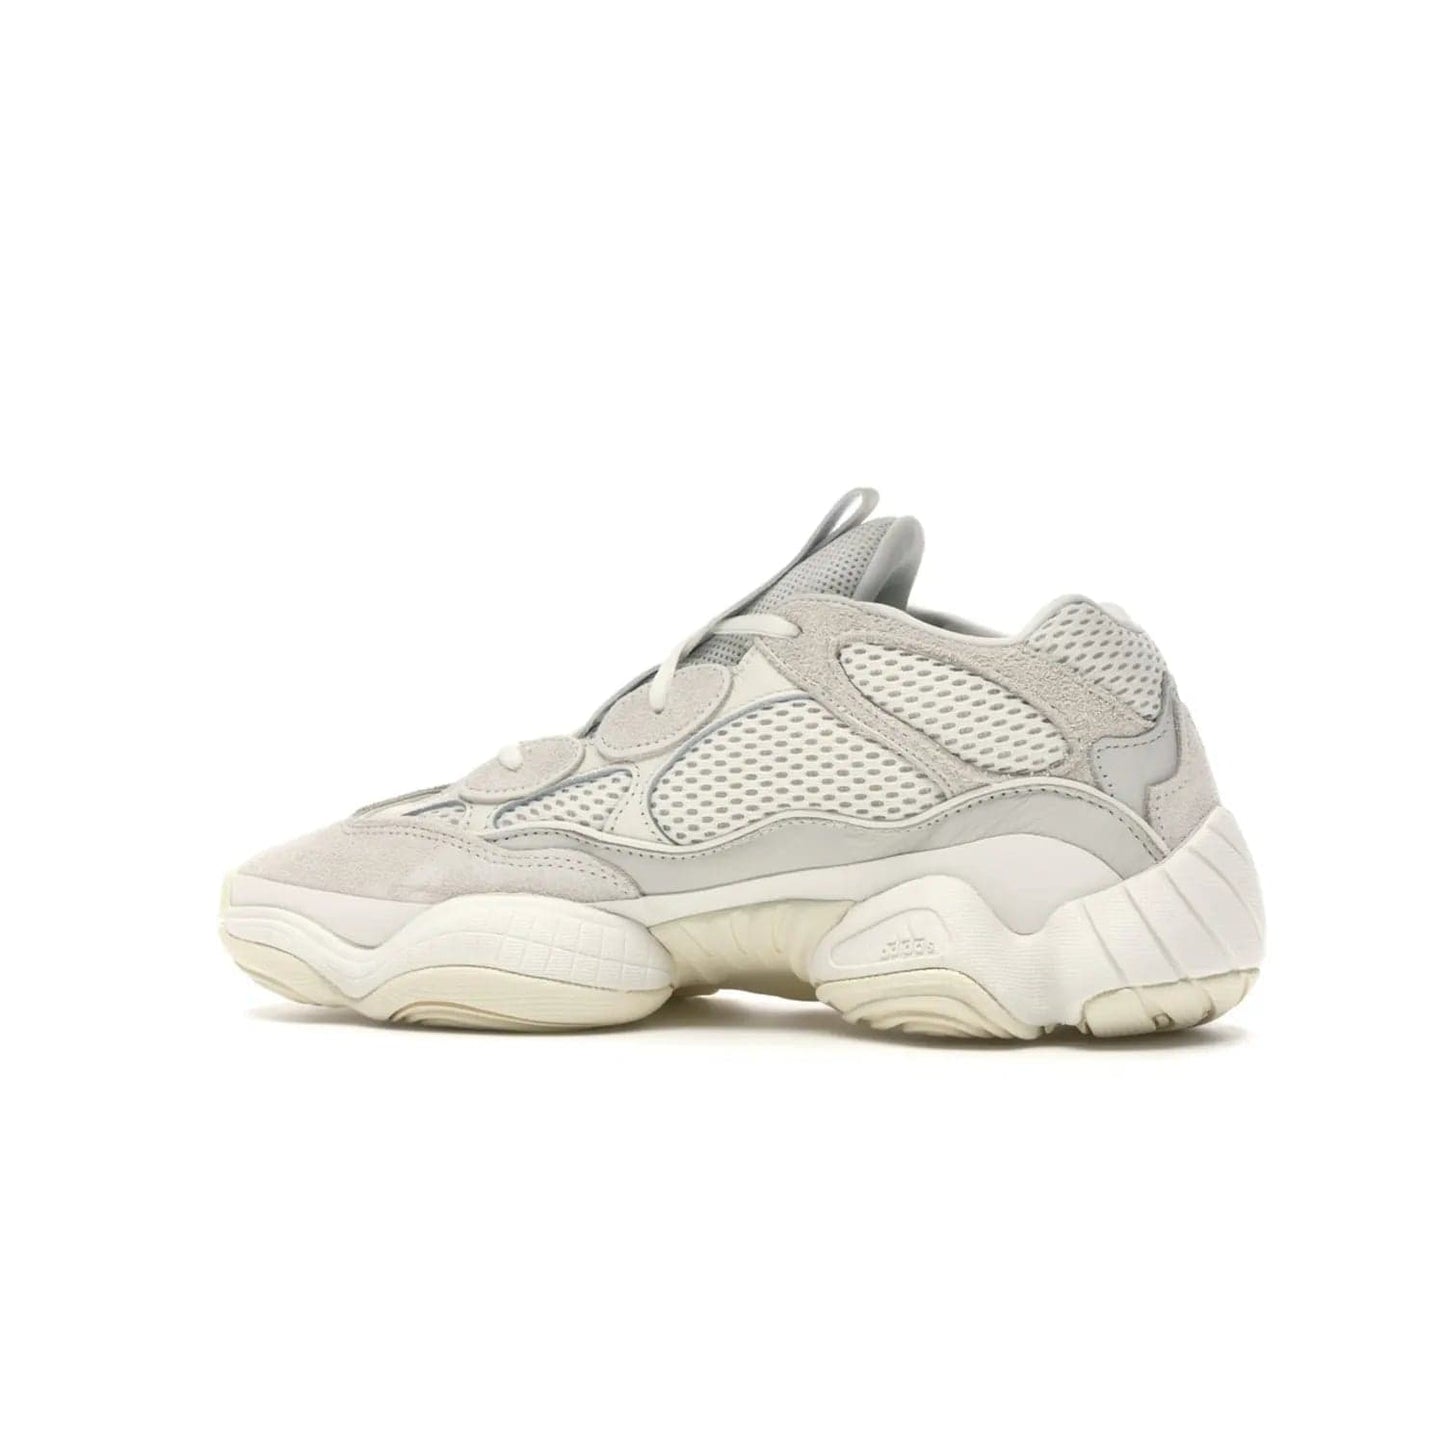 adidas Yeezy 500 Bone White - Image 21 - Only at www.BallersClubKickz.com - Classic look perfect for any sneaker collection. The adidas Yeezy 500 "Bone White" blends a white mesh upper with suede overlays & a chunky midsole inspired by the Adidas KB3. Complimented by a tonal-cream outsole, this timeless style is a must-have.